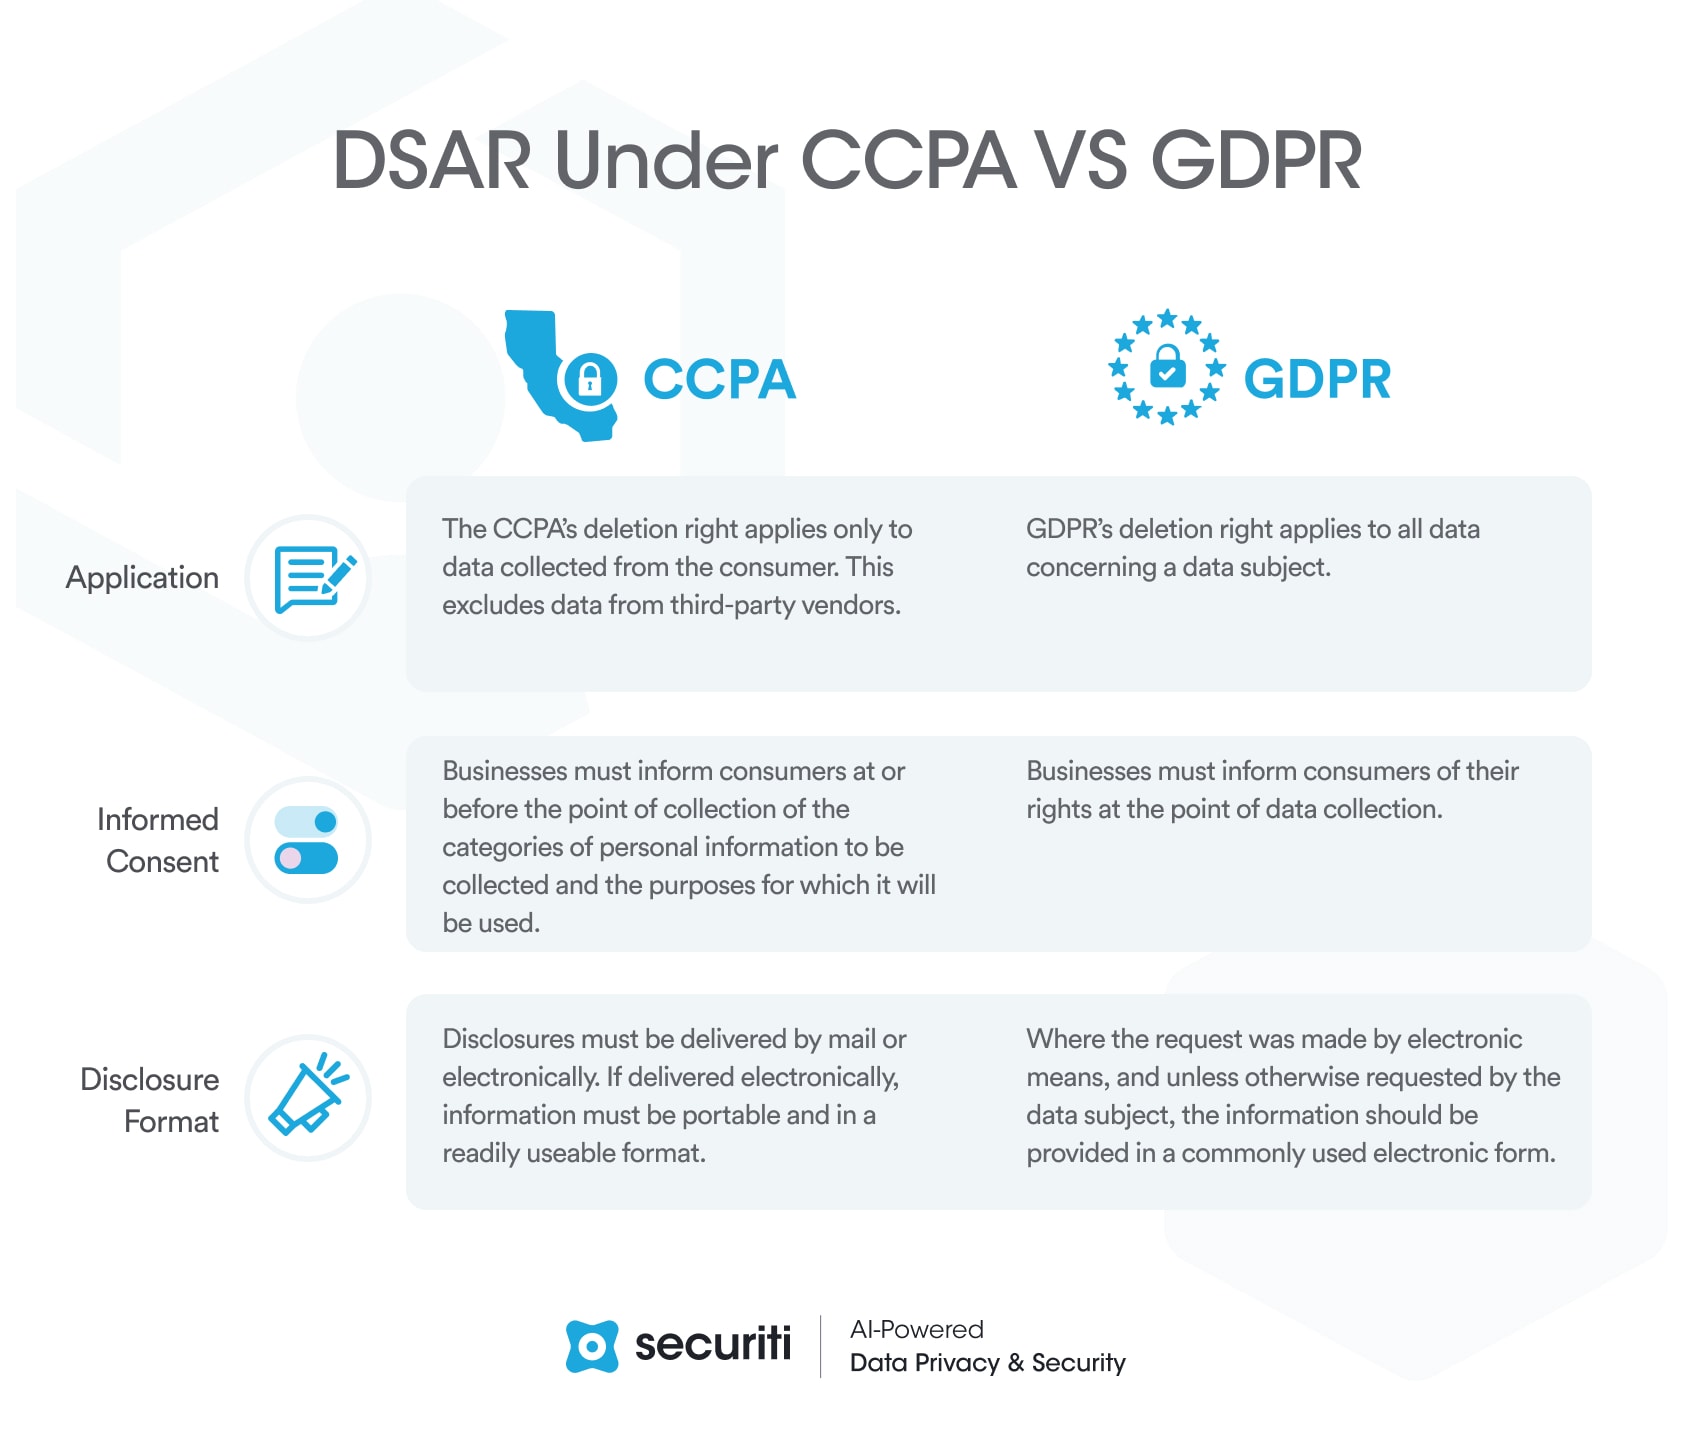 Differences between GDPR and CCPA